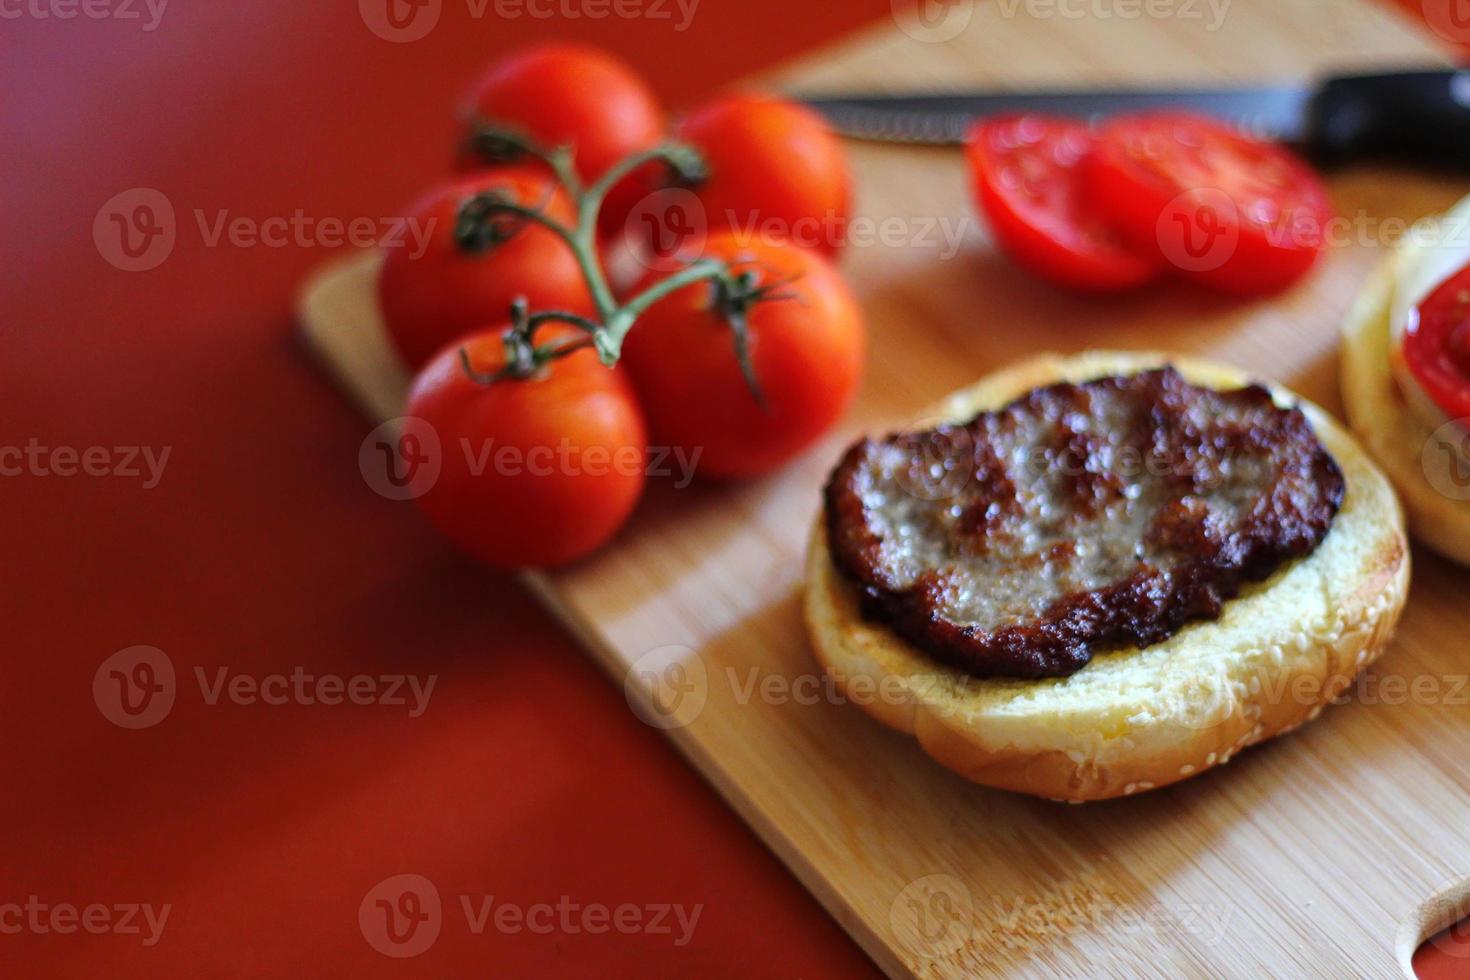 The hamburger is being prepared and served with sliced tomatoes, onions, pickles. on a wooden cutting board in the kitchen photo